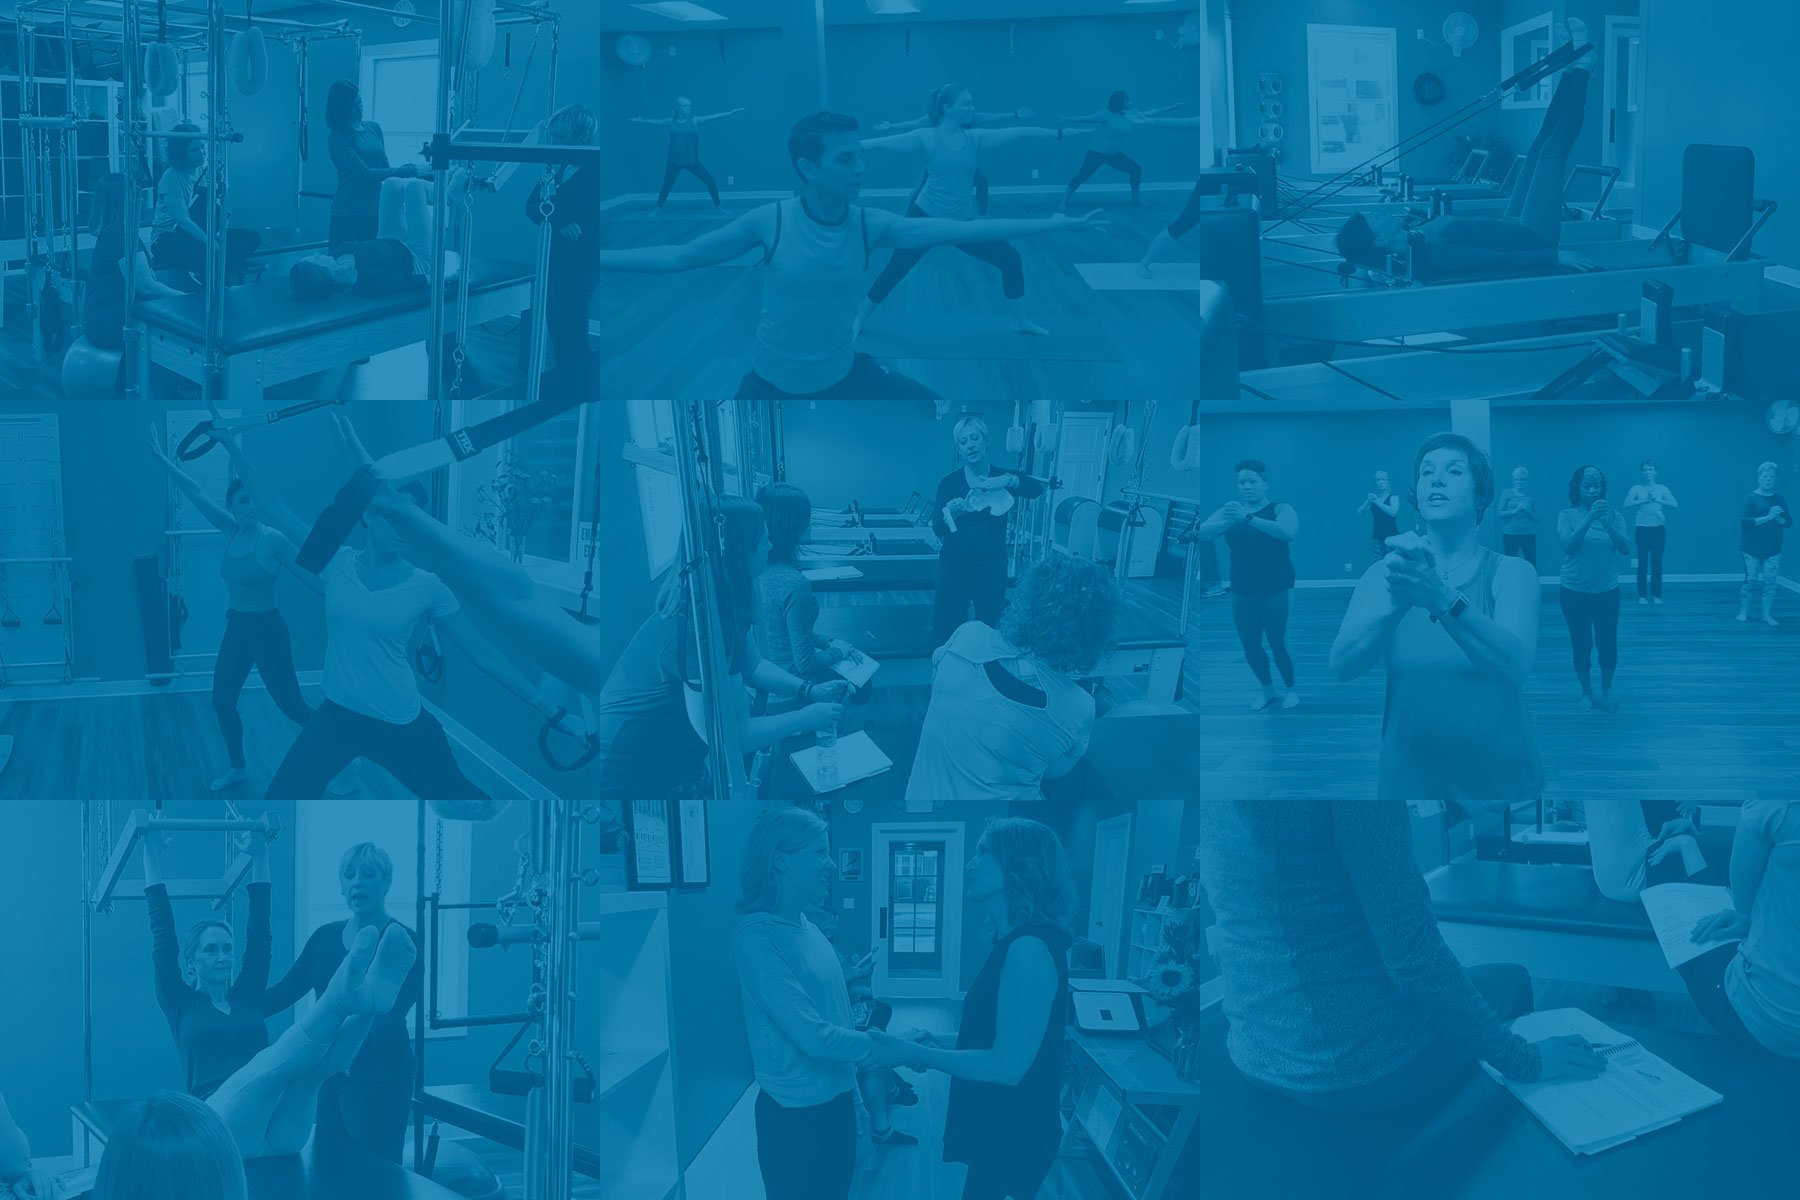 Montage of pilates scenes in studio - low contrast blue color tinted background